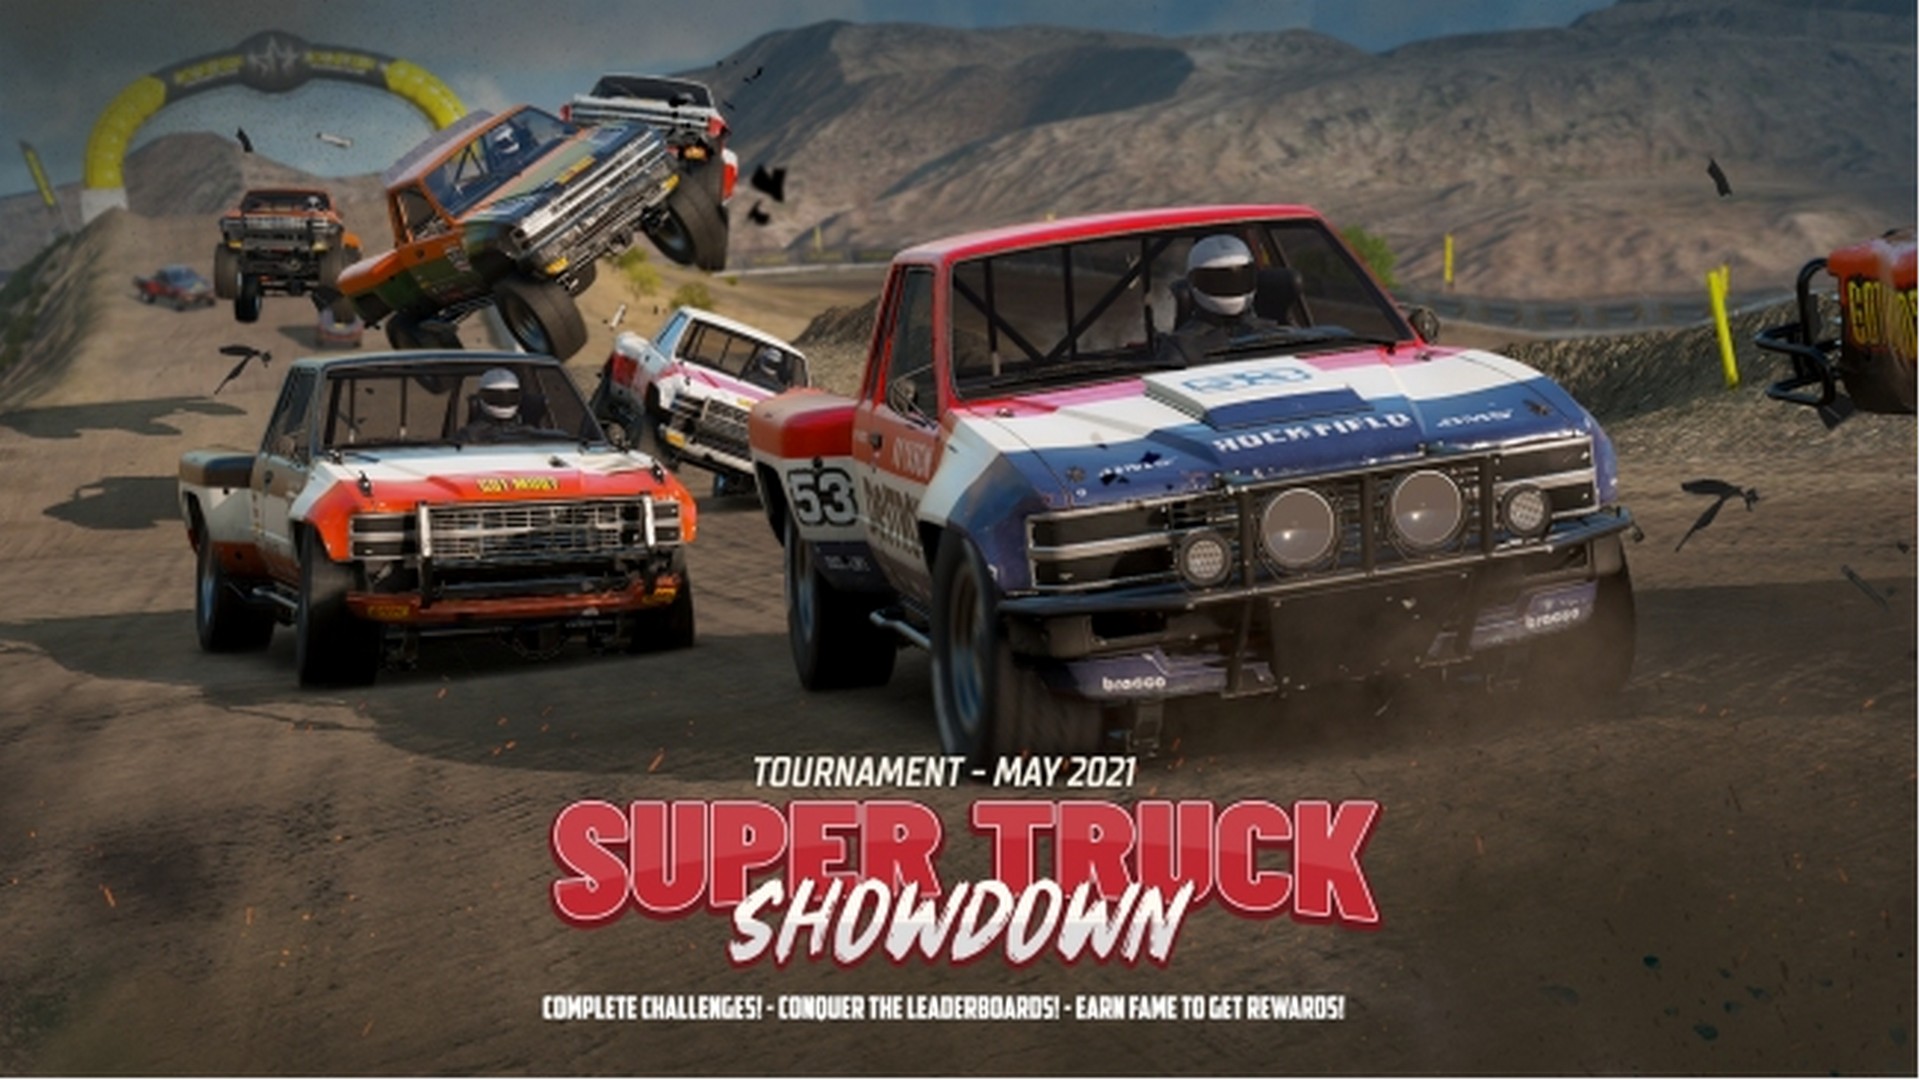 Wreckfest – Super Truck Showdown Tournament And Off-Road Car Pack Are Out Now